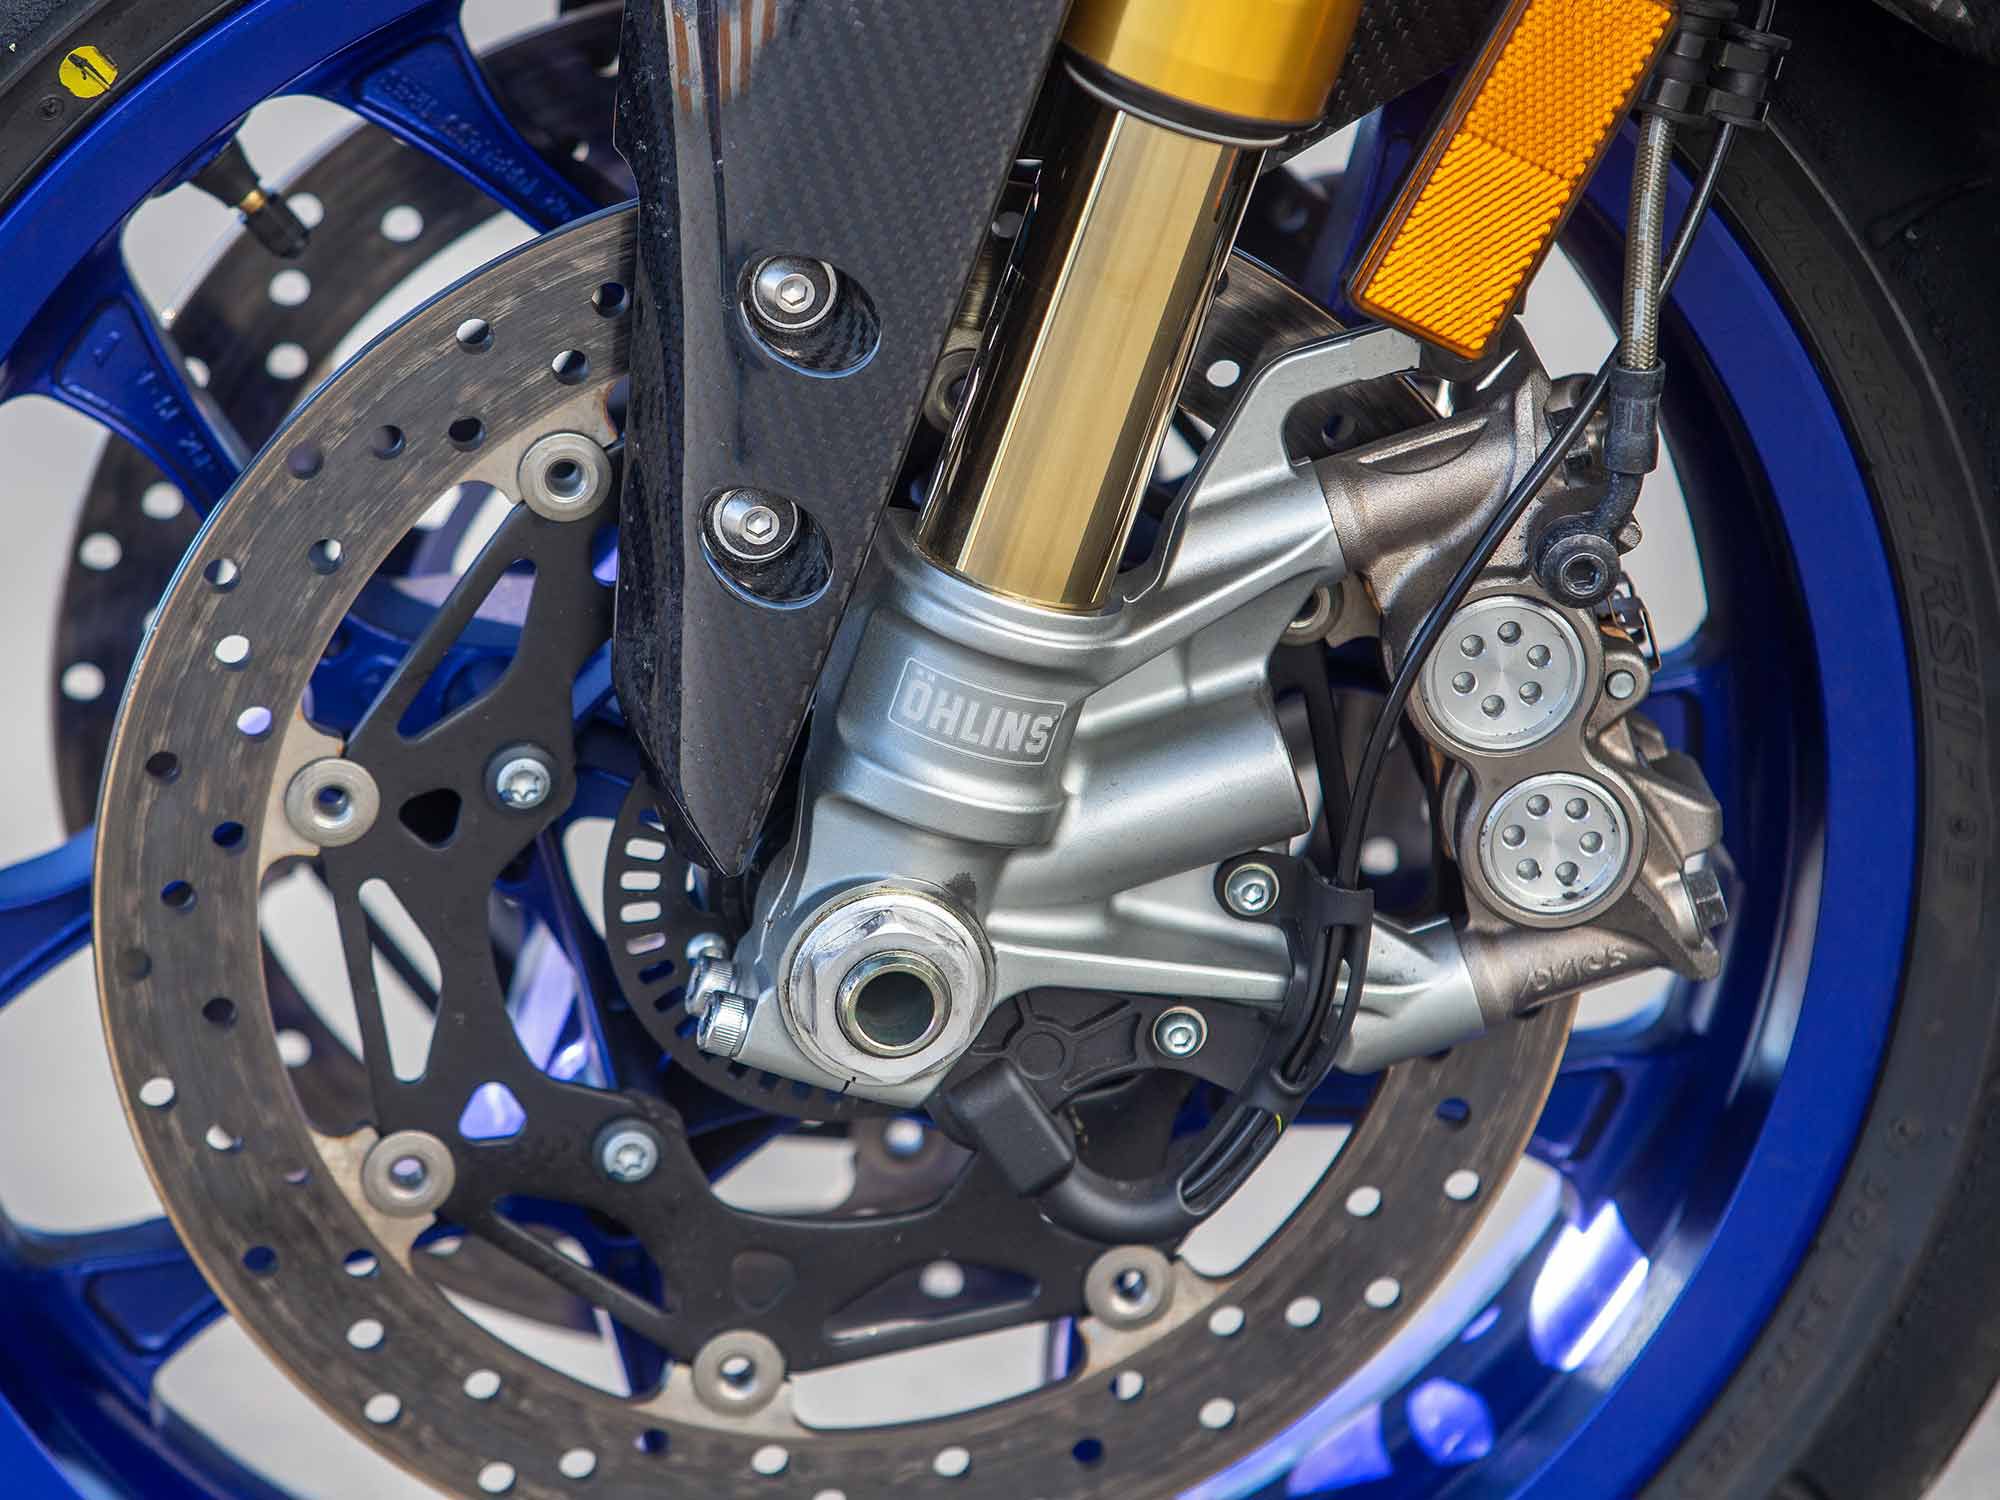 The ‘21 YZF-R1M employs Ohlins latest and greatest semi-active electronic suspension with a gas-charged fork. The suspension offers versatile performance with a few pushes of a button.